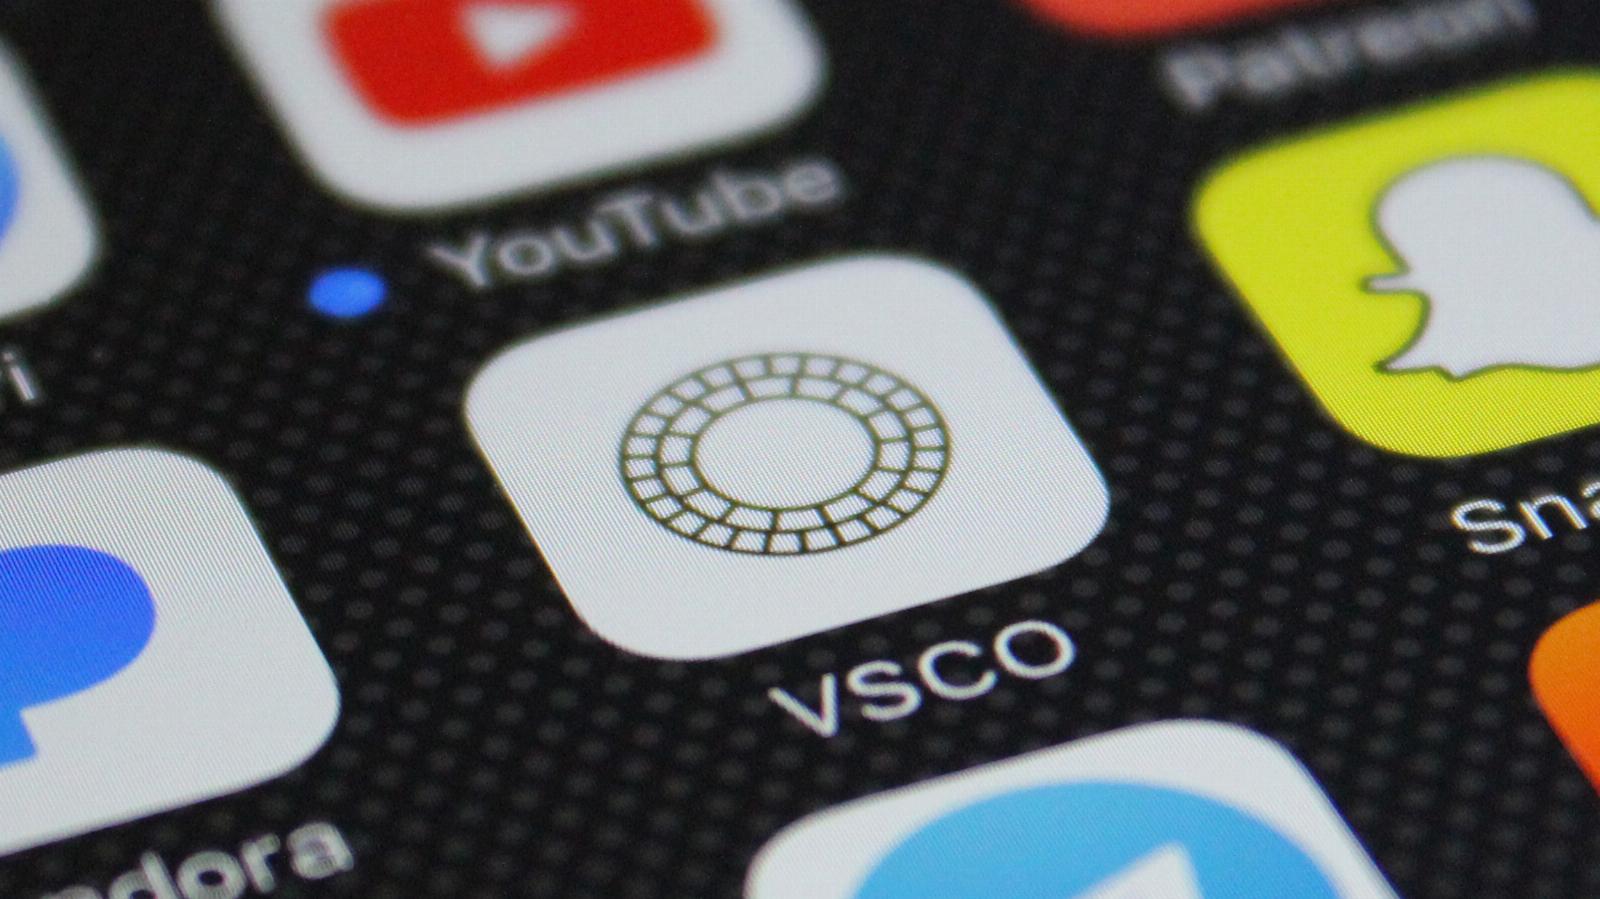 VSCO gains former Figma COO Eric Wittman as its new CEO